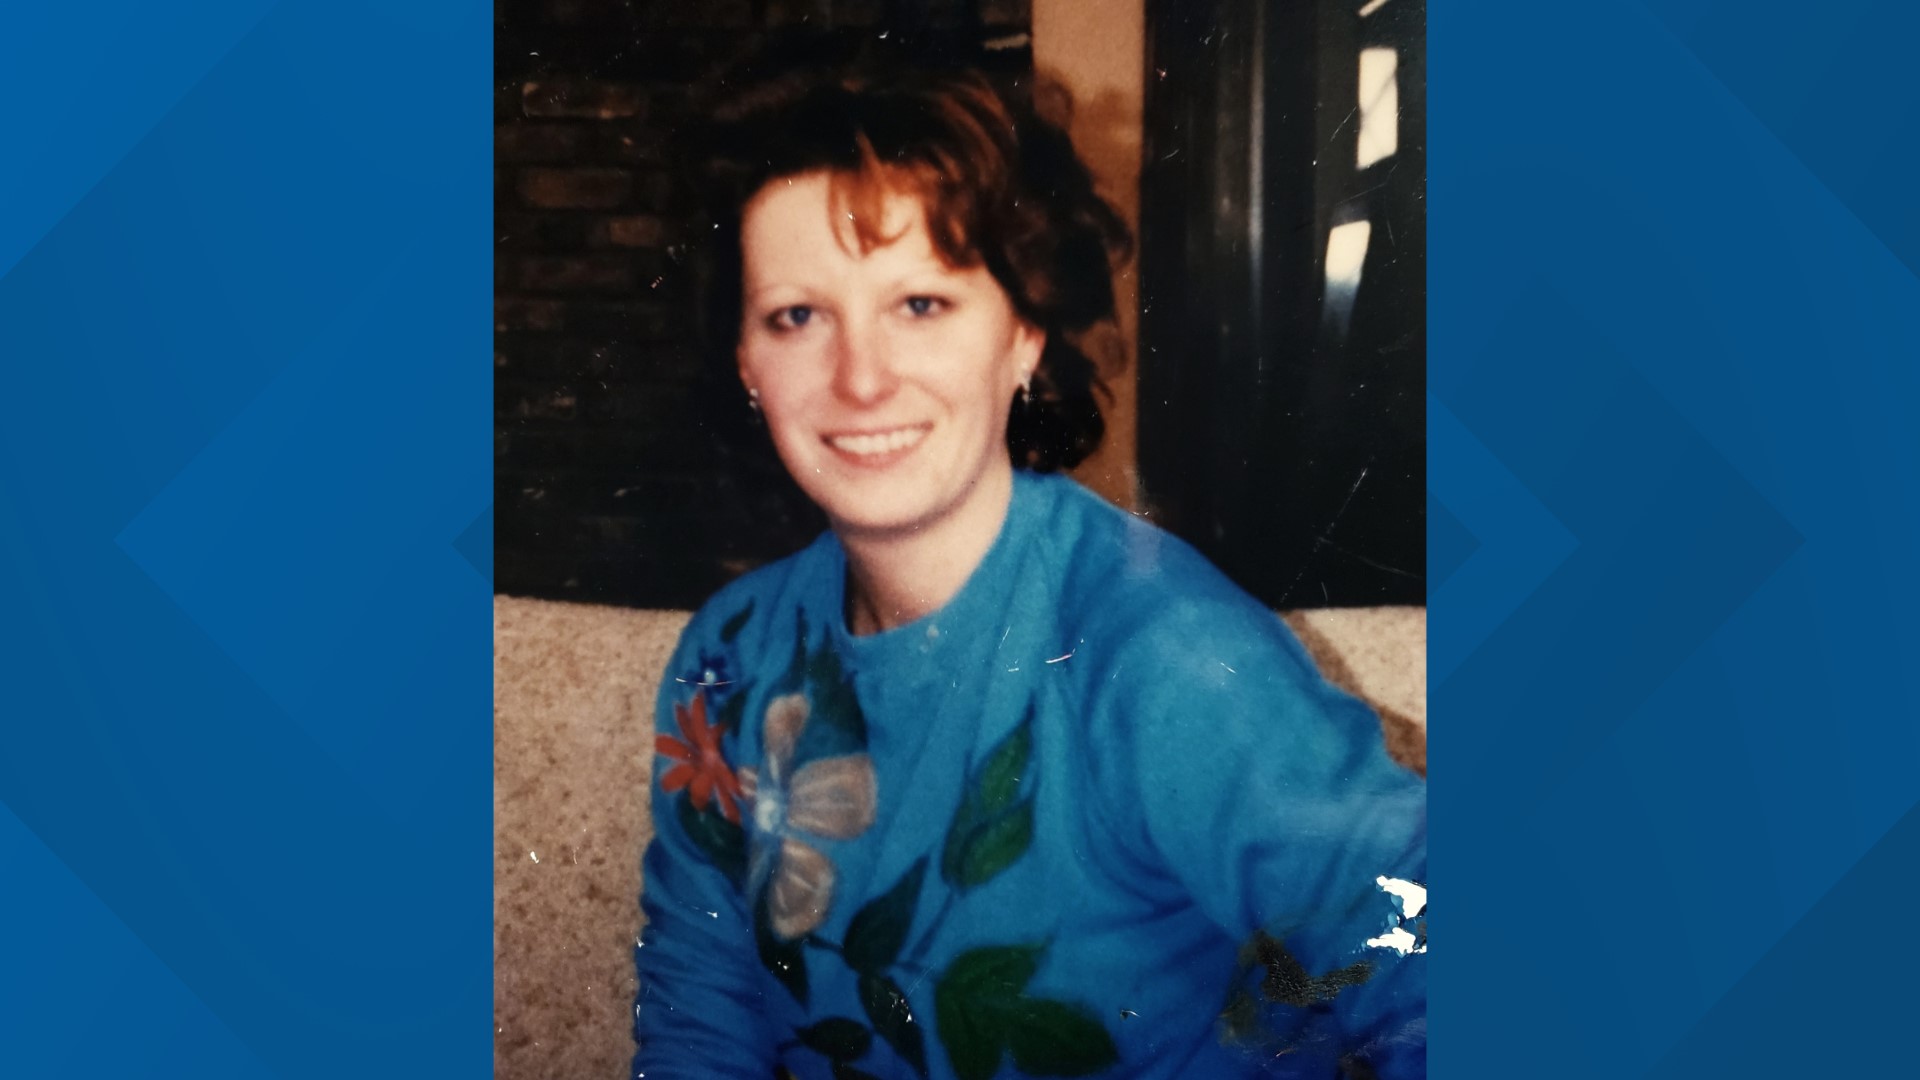 Patricia Woll, 43, died in the fire at an apartment house on River Road near Milanville in August of 1997.